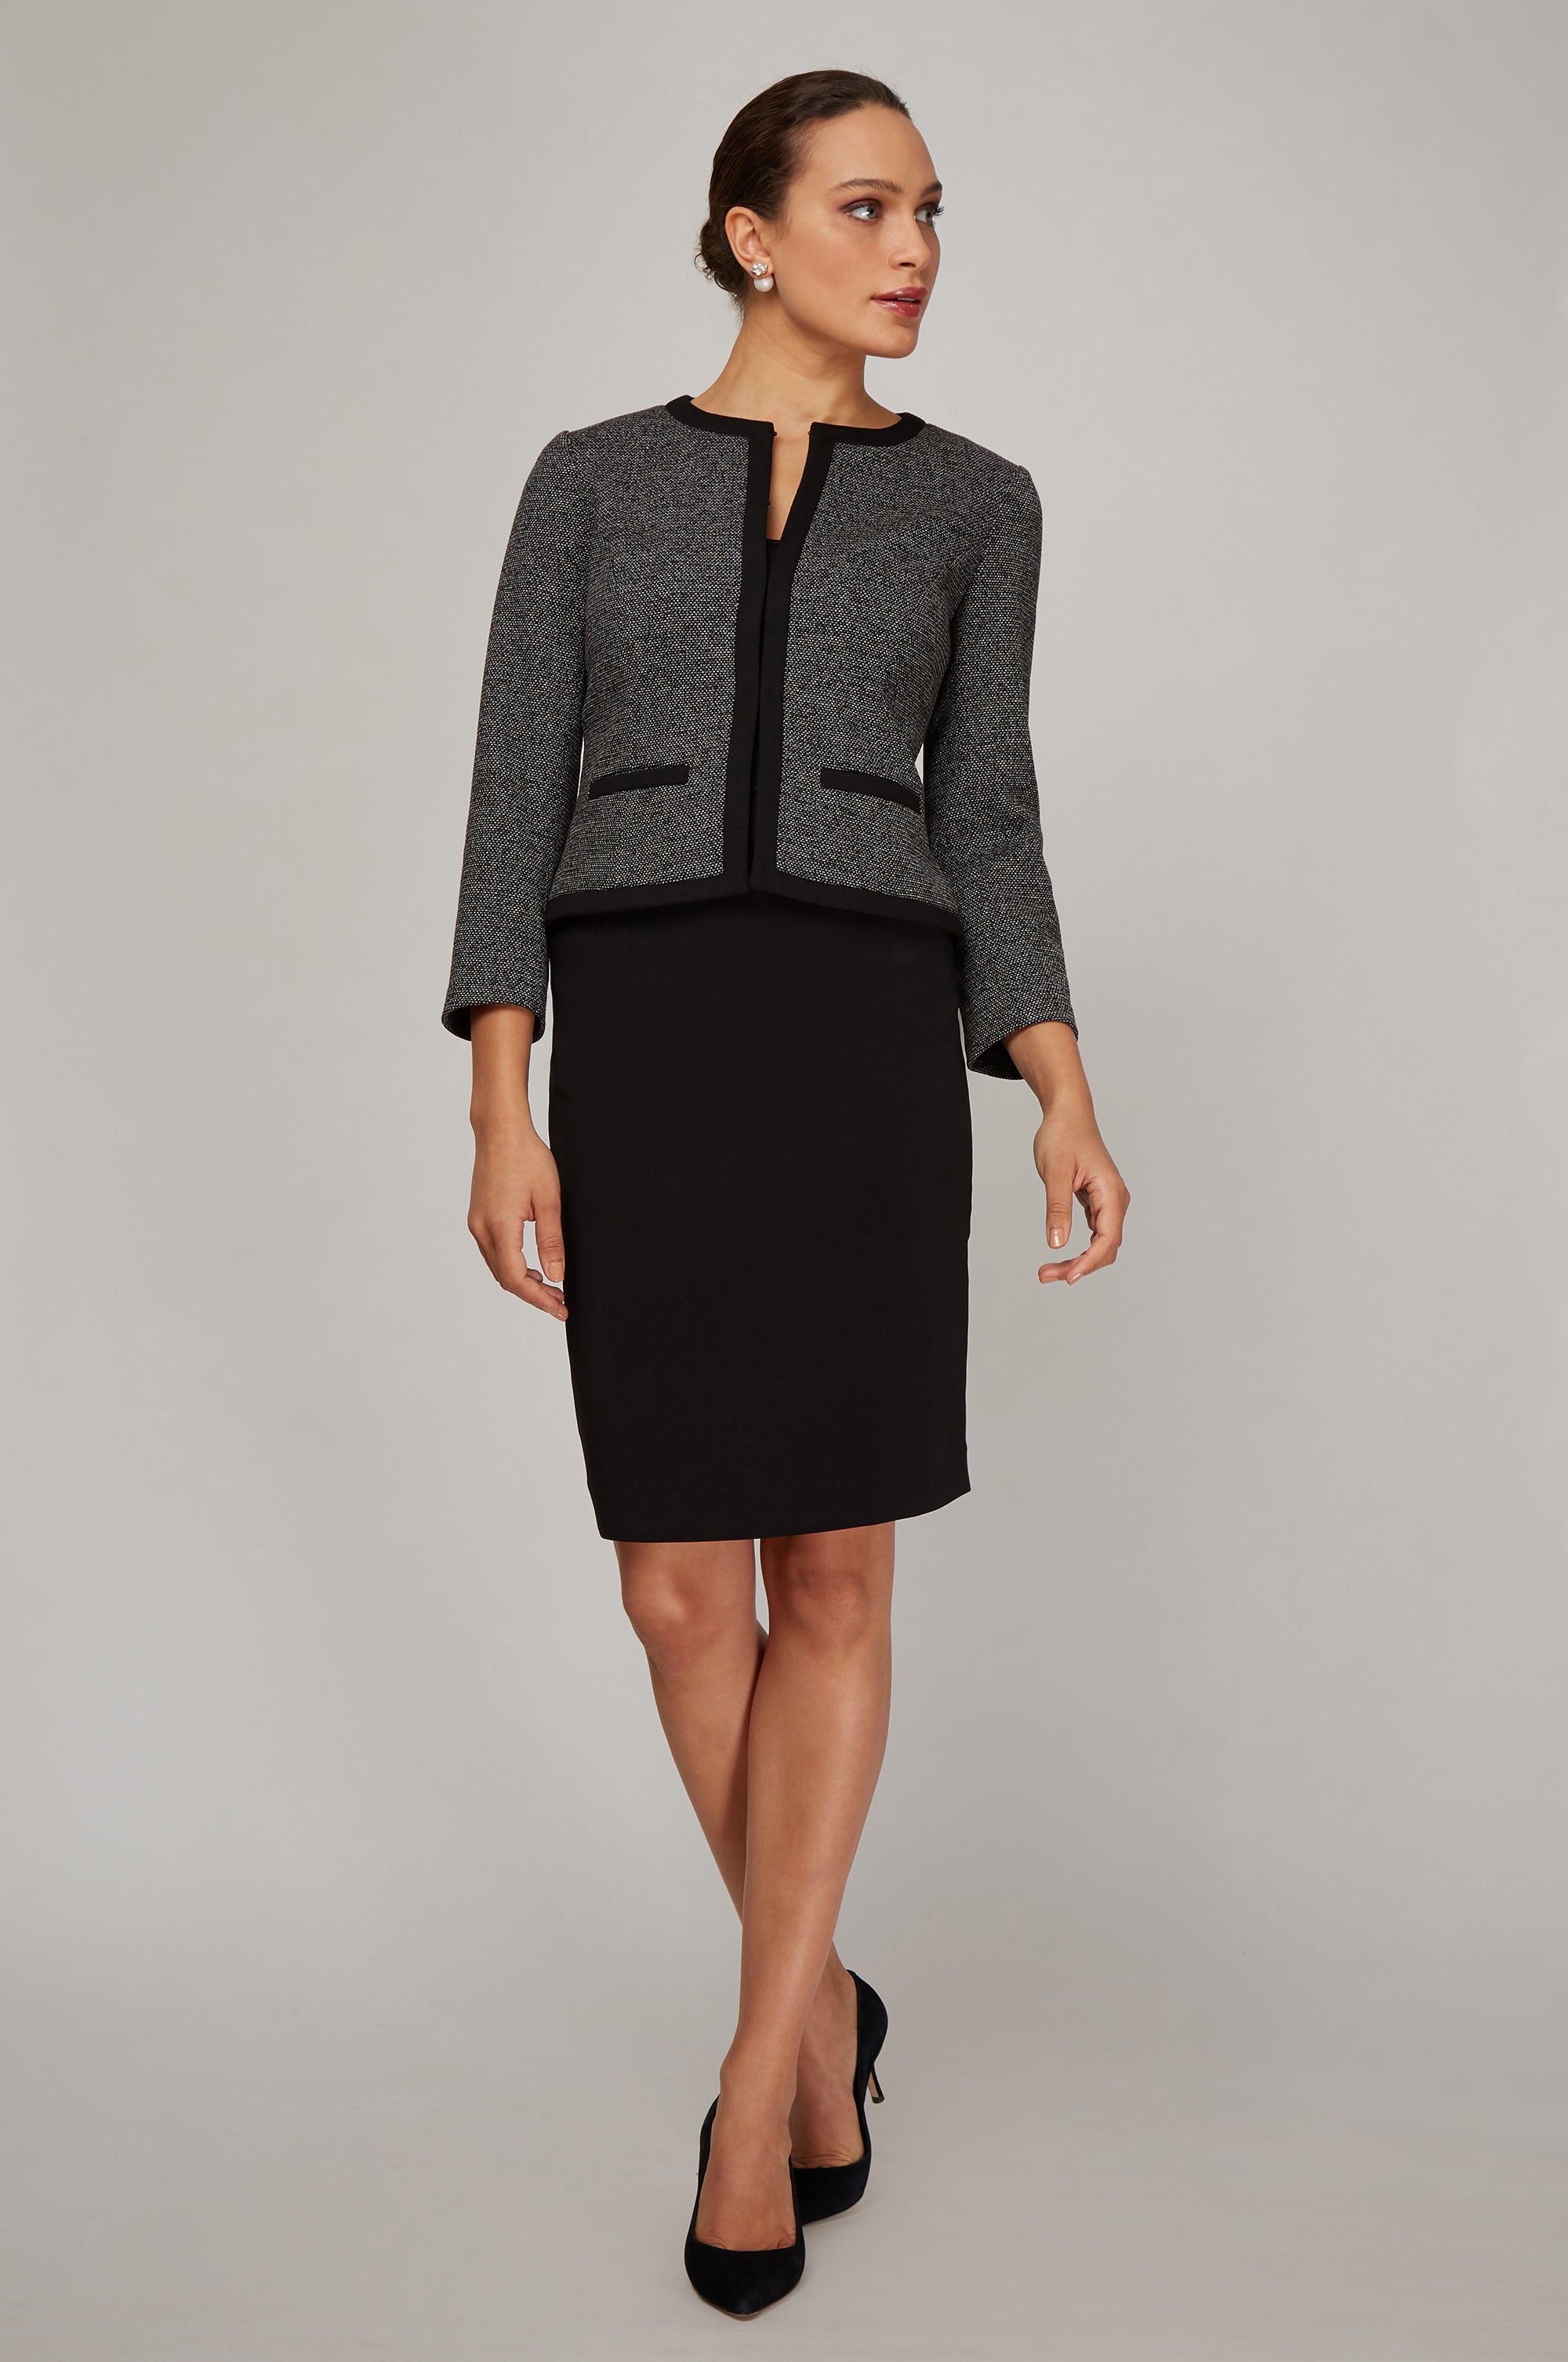 Women' Business Michelle Jacket - Black and White Knit NORA GARDNER | OFFICIAL STORE for work and office